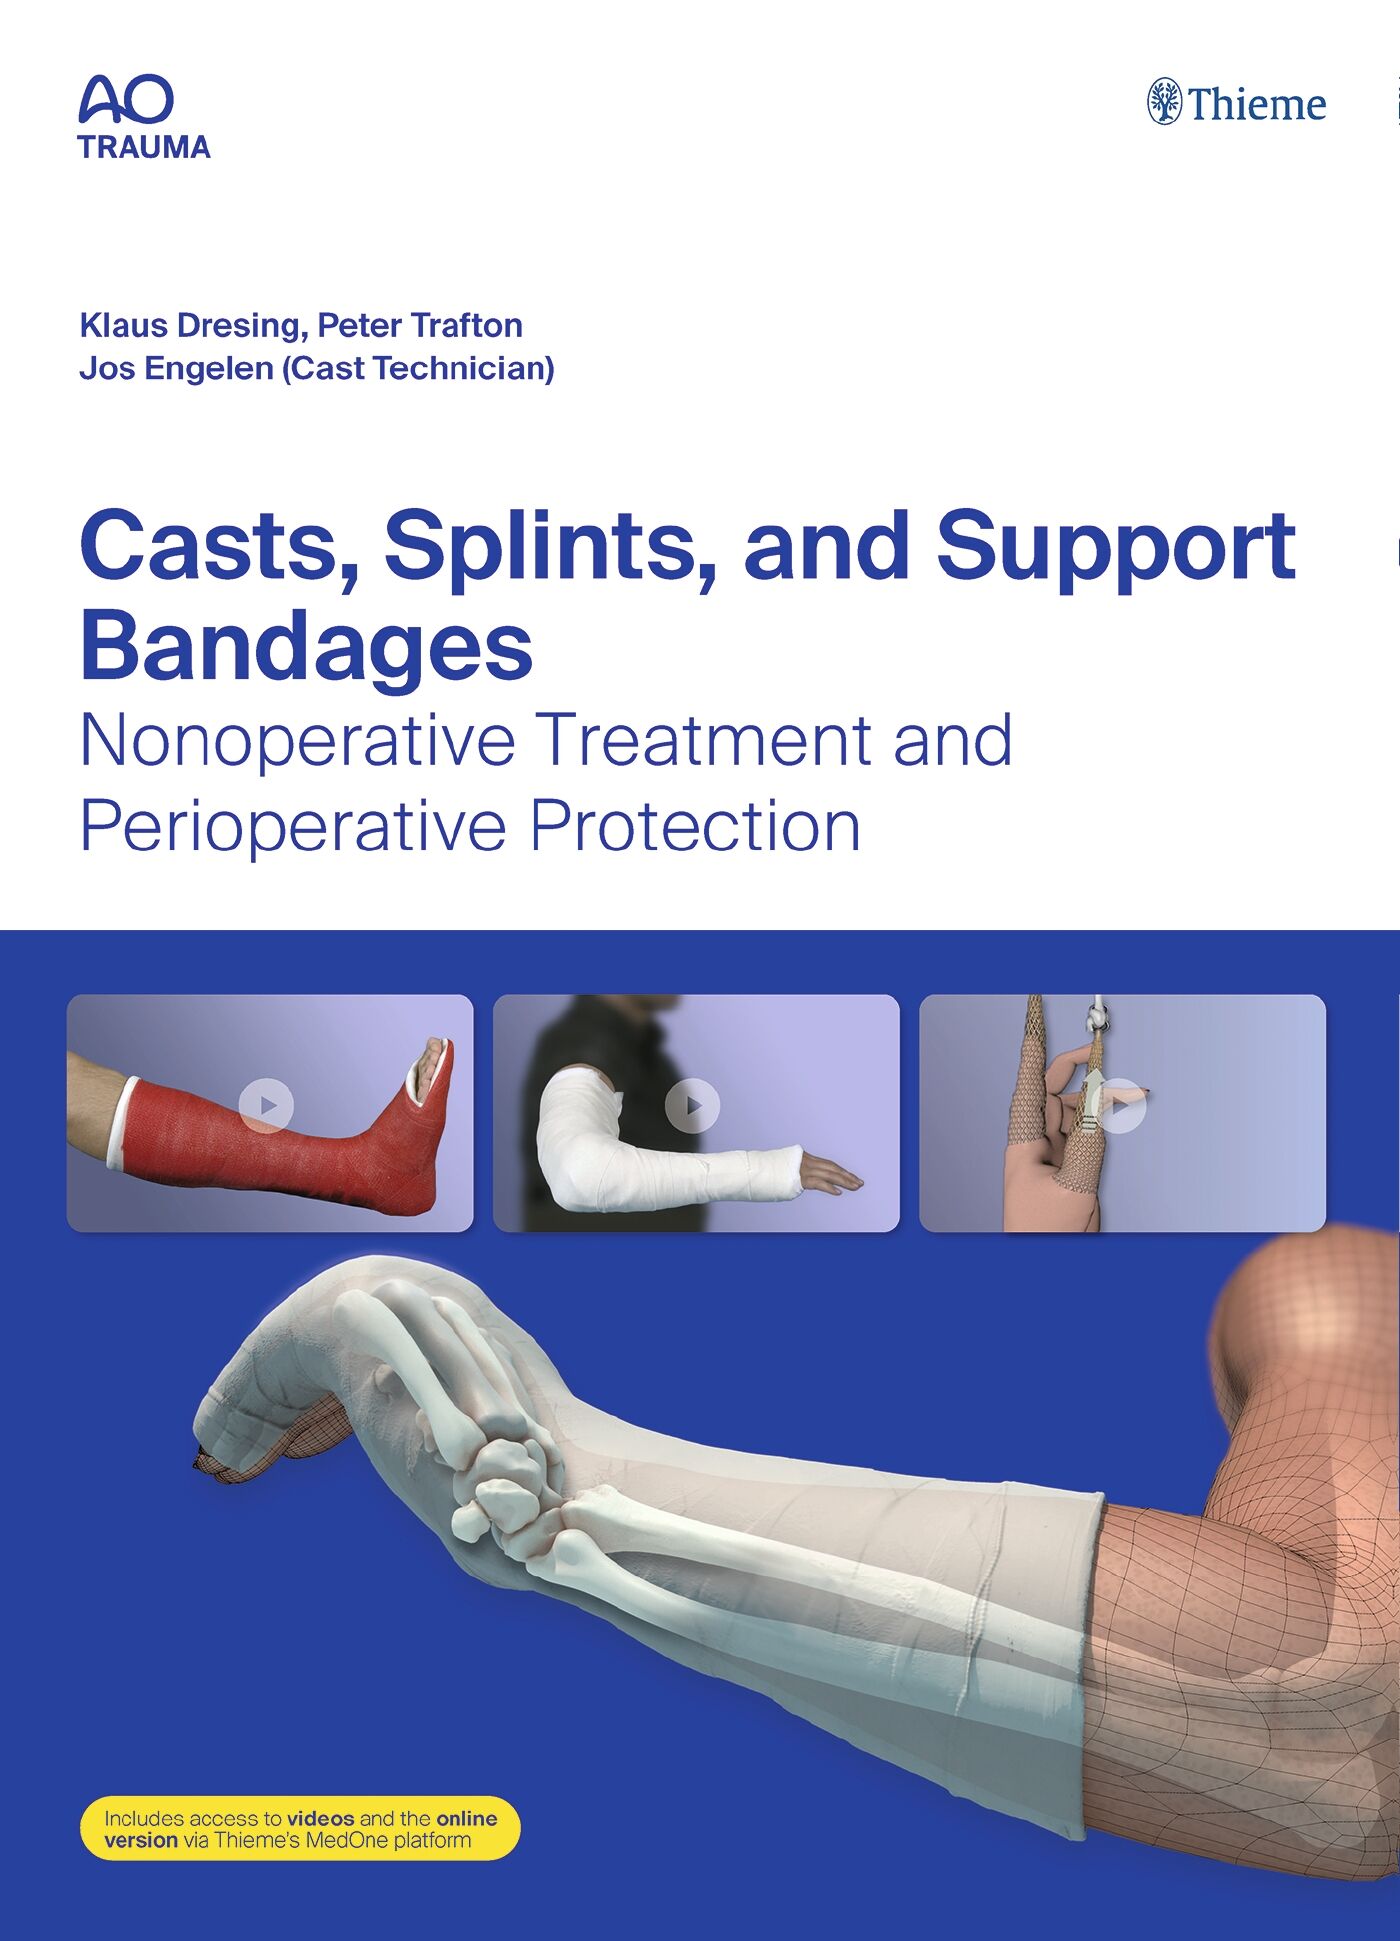 Casts, Splints, and Support Bandages, 9783132444720